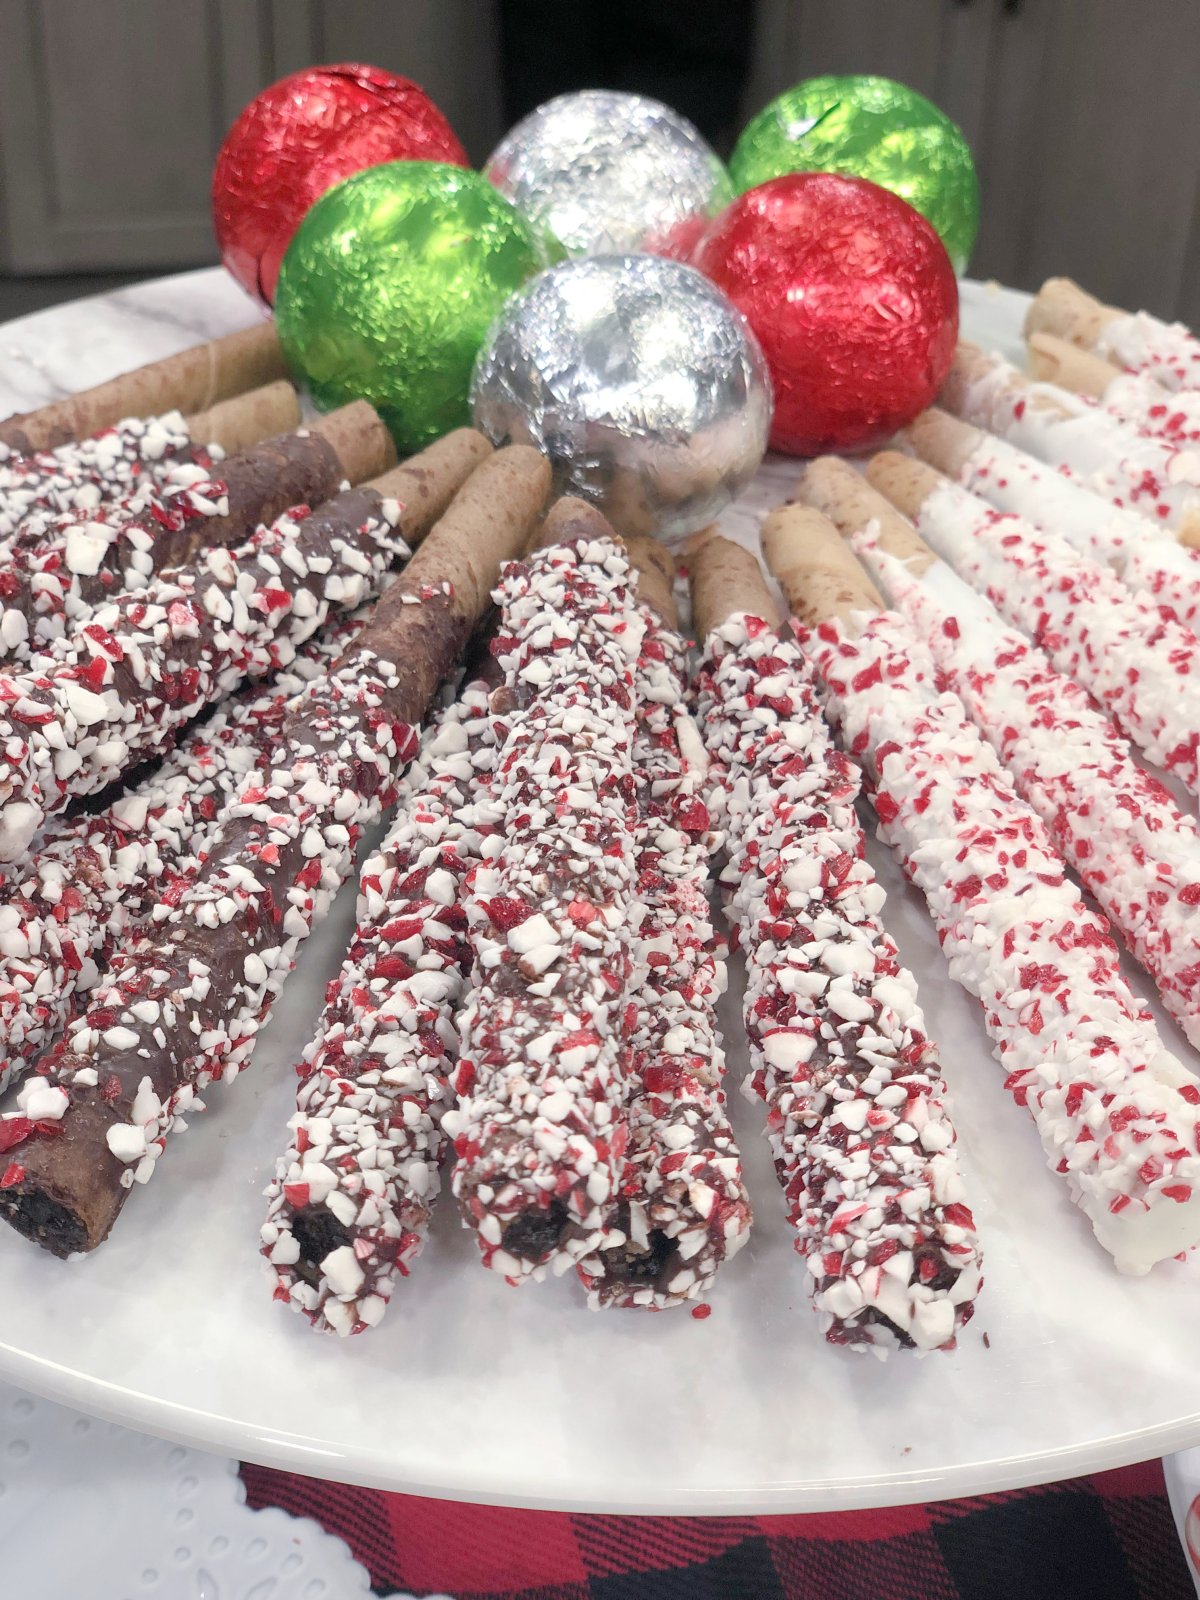 Image contains wrapped hot chocolate bombs and chocolate dipped pirouette cookies.